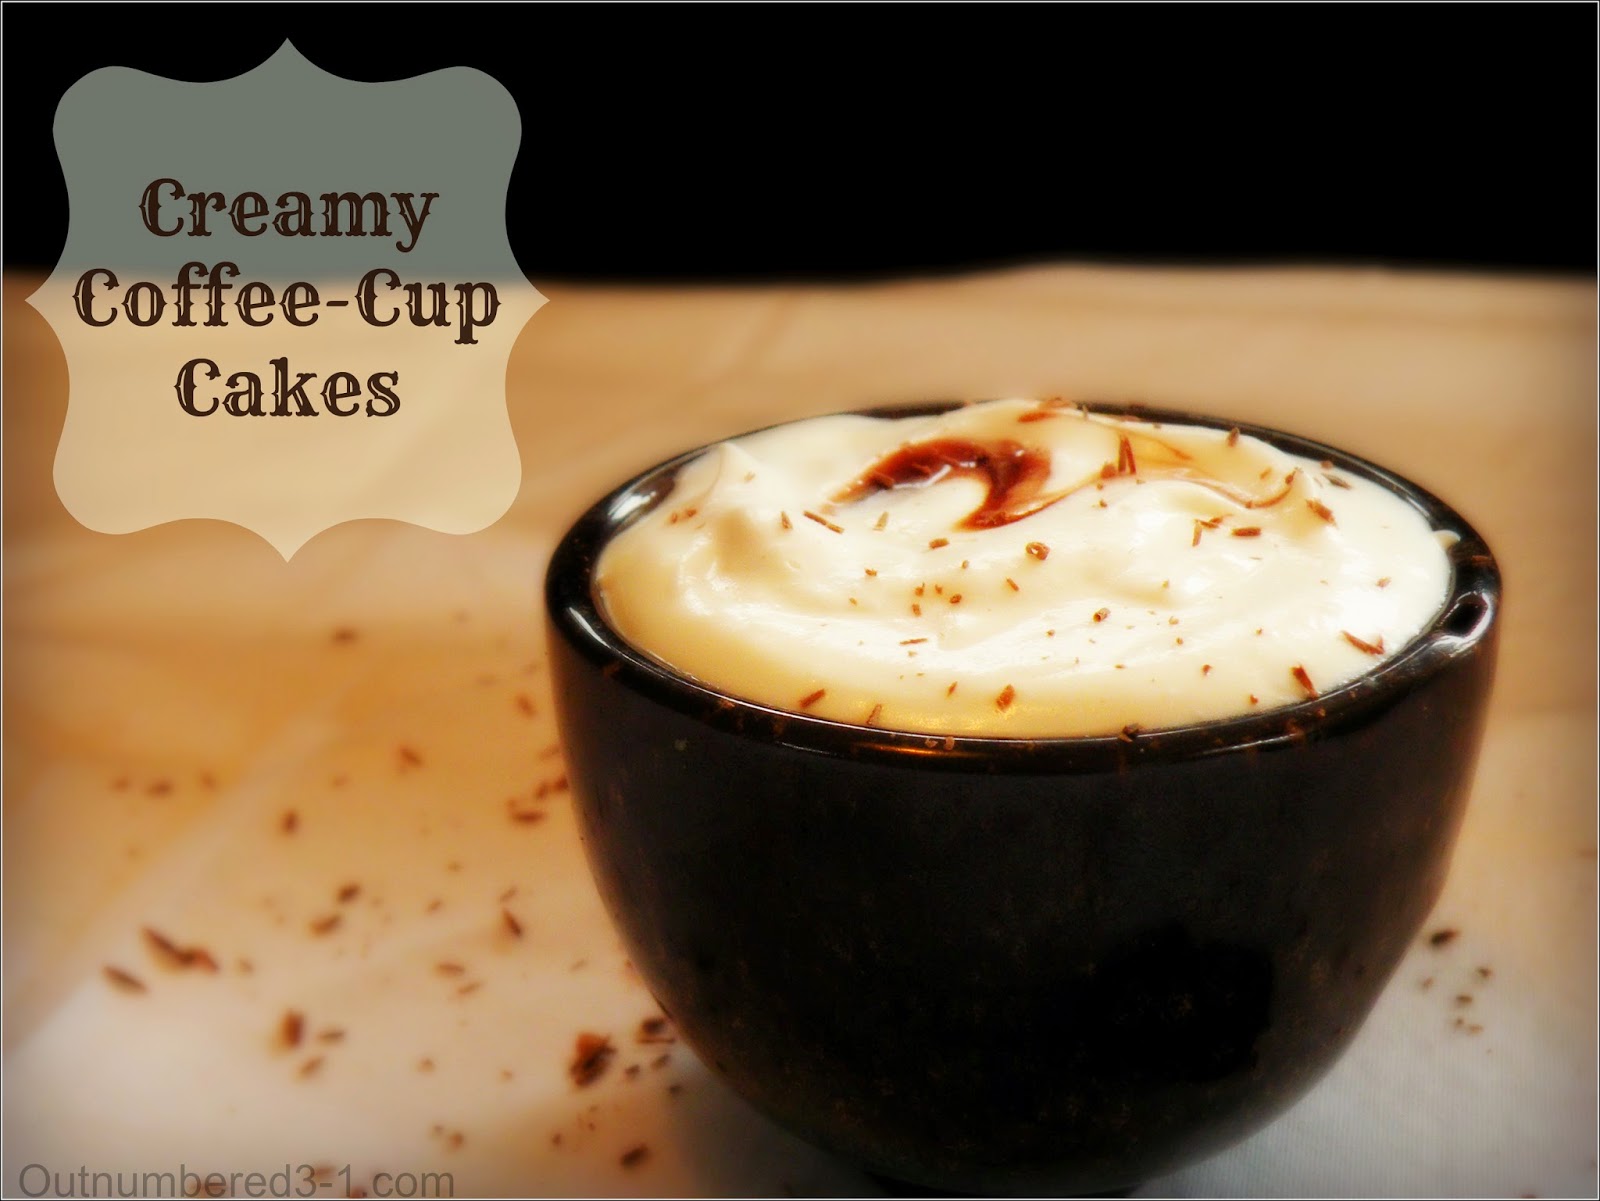 Creamy Coffee-Cup Cakes